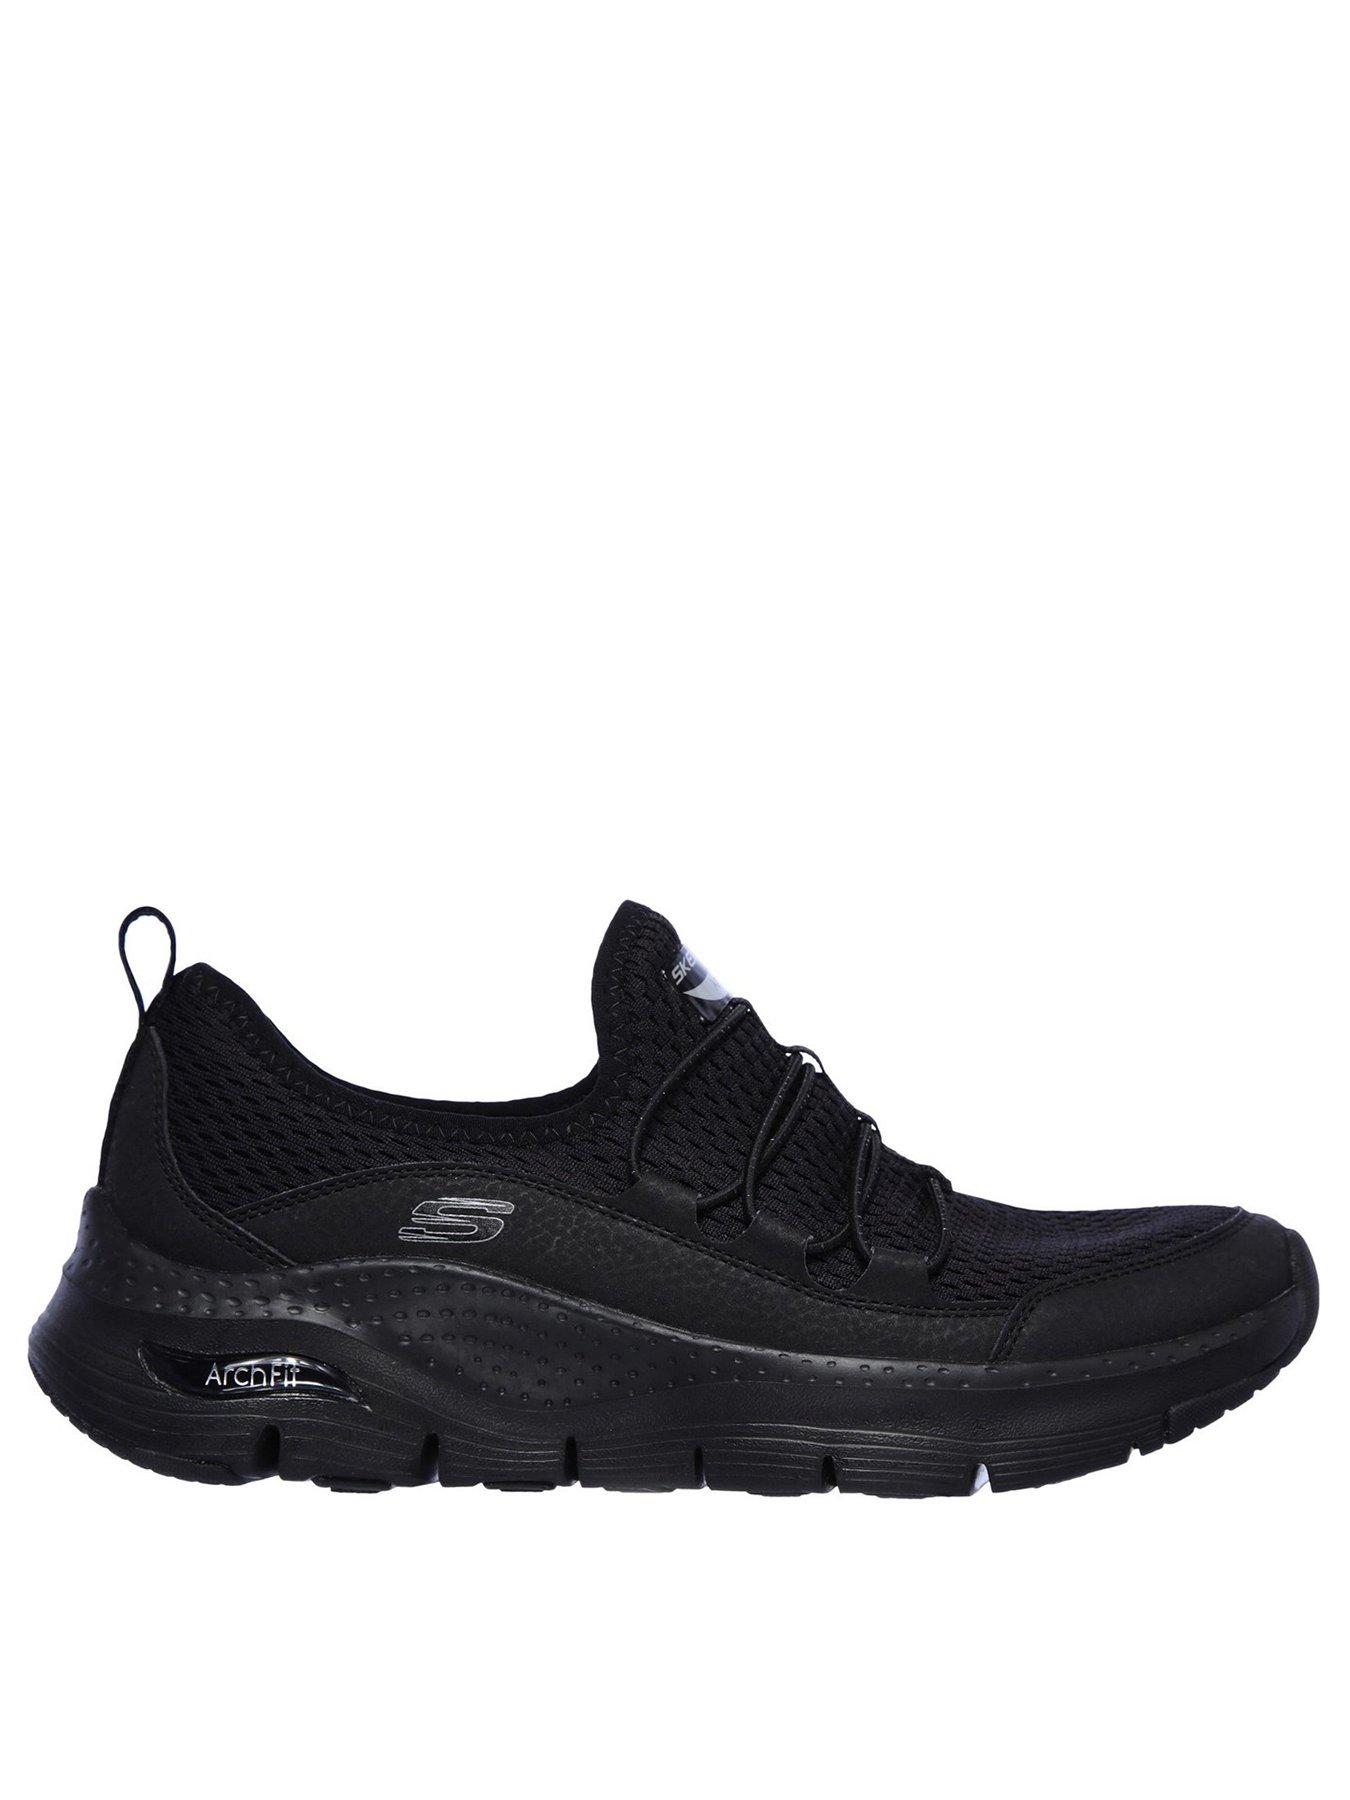 skechers with arch support